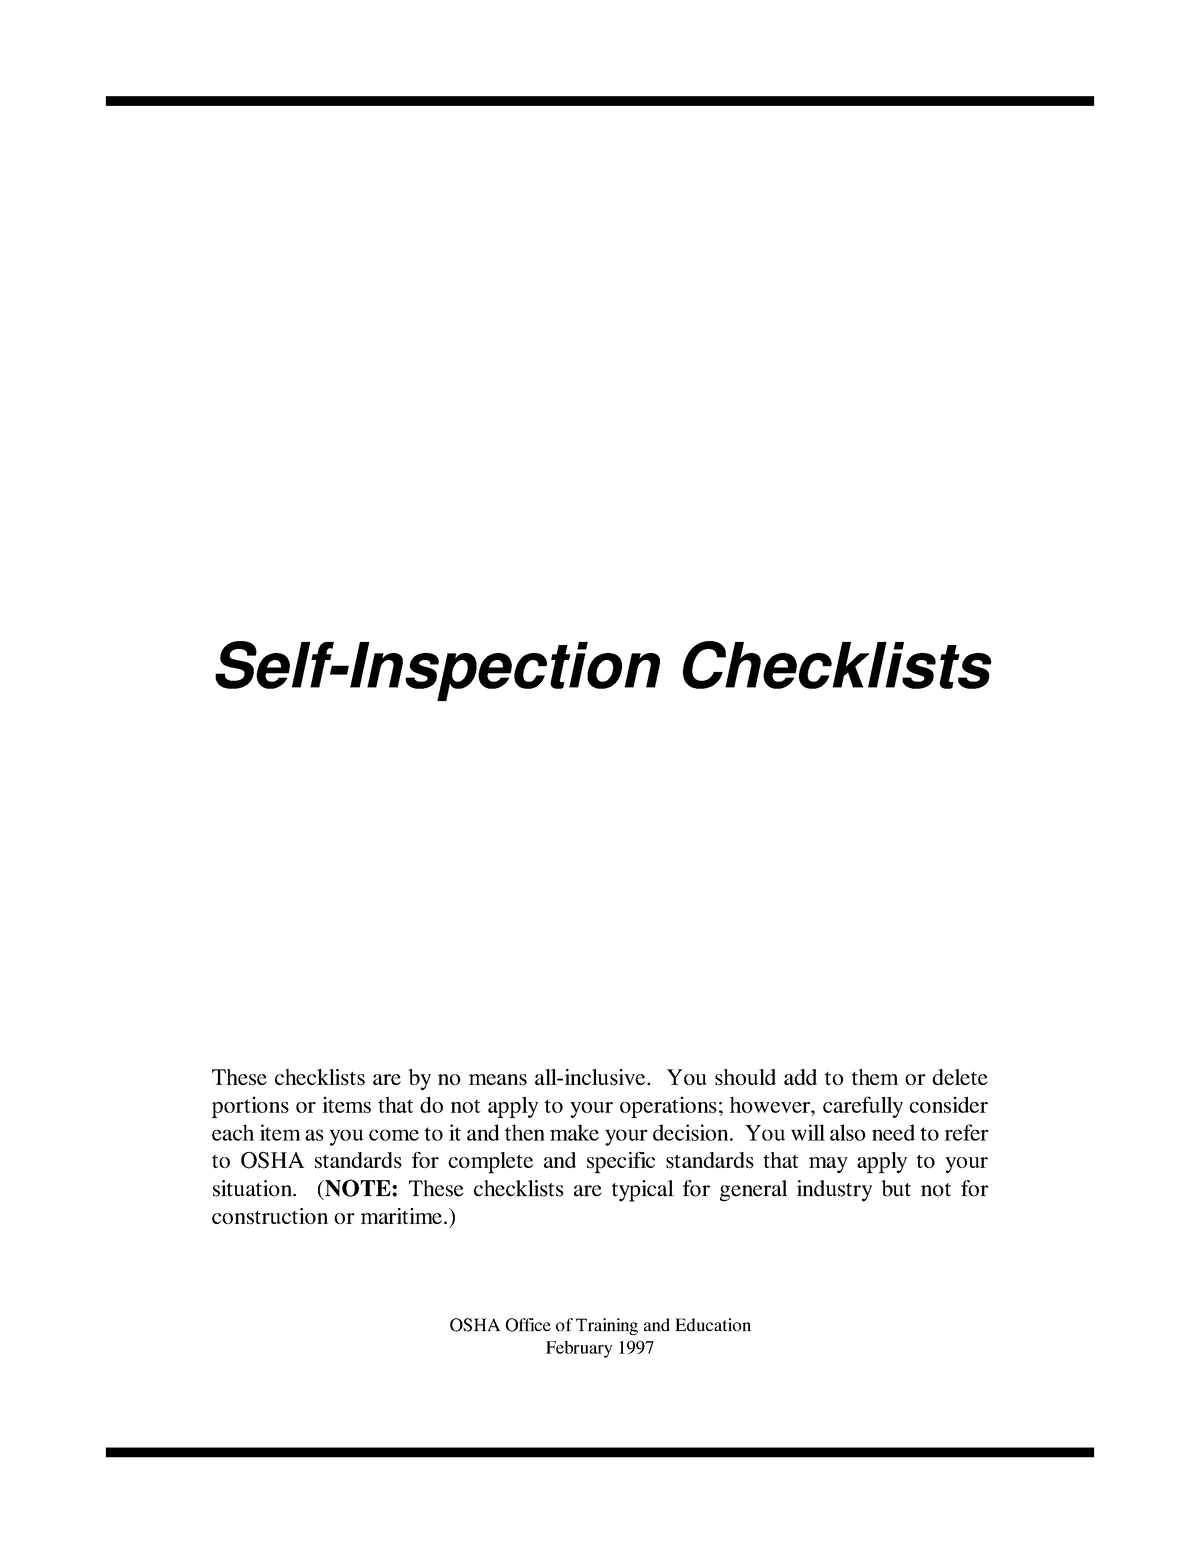 Osha Inspection Checklists Self Inspection Checklists These